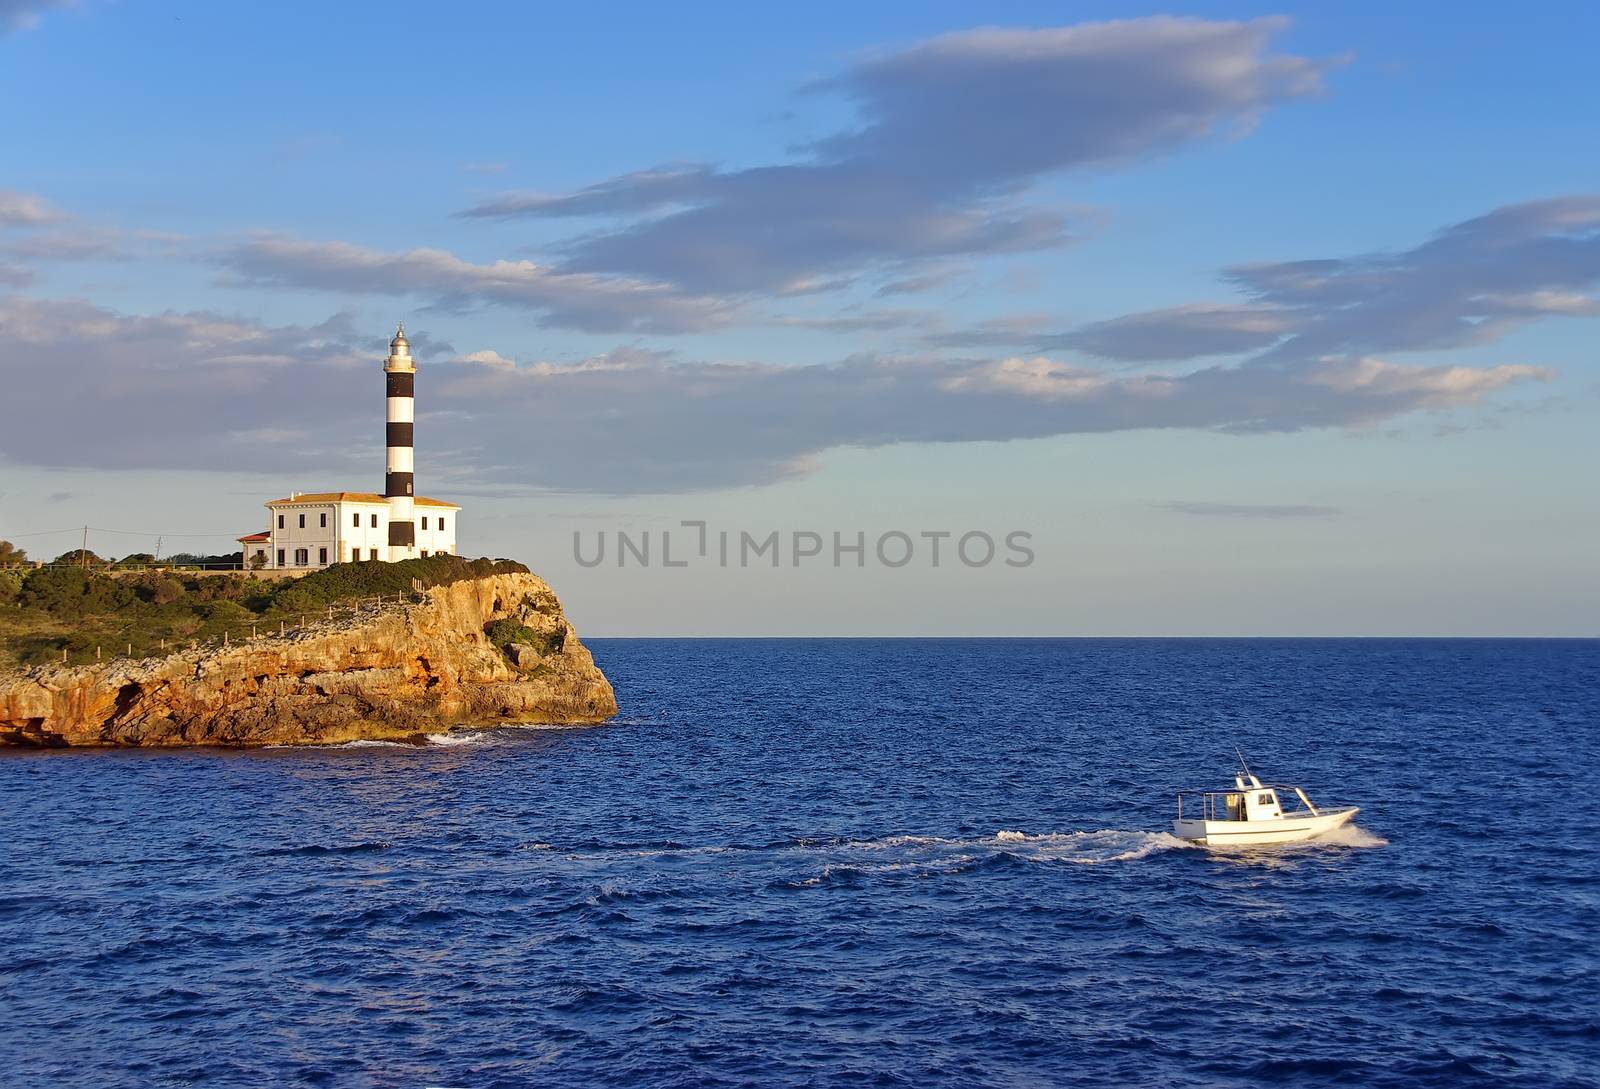 Boat navigating near an ancient lighhouse in spain